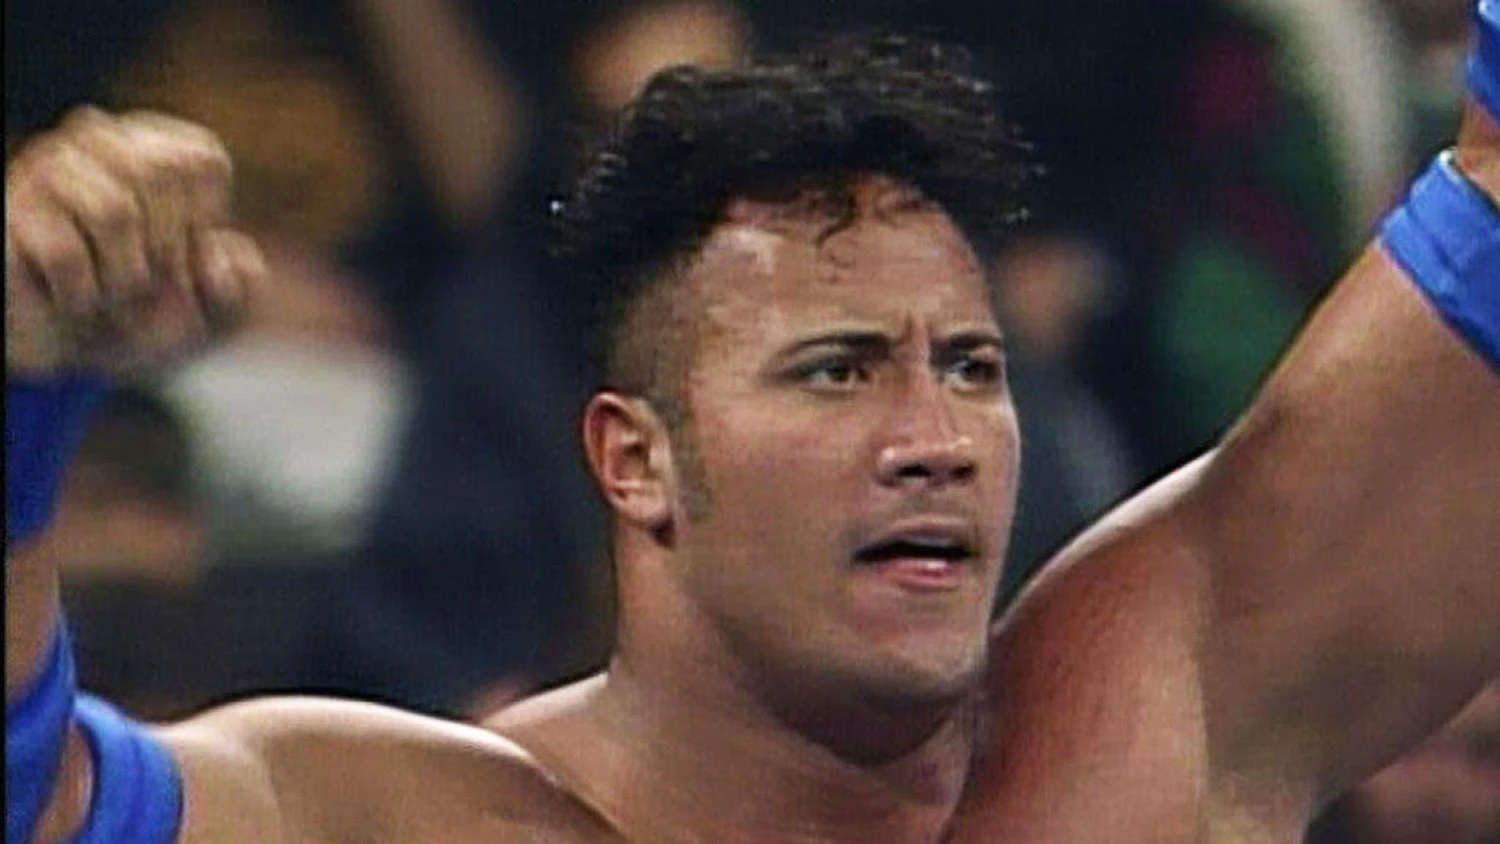 Dwayne Johnson made $40 per wrestling match in his early days